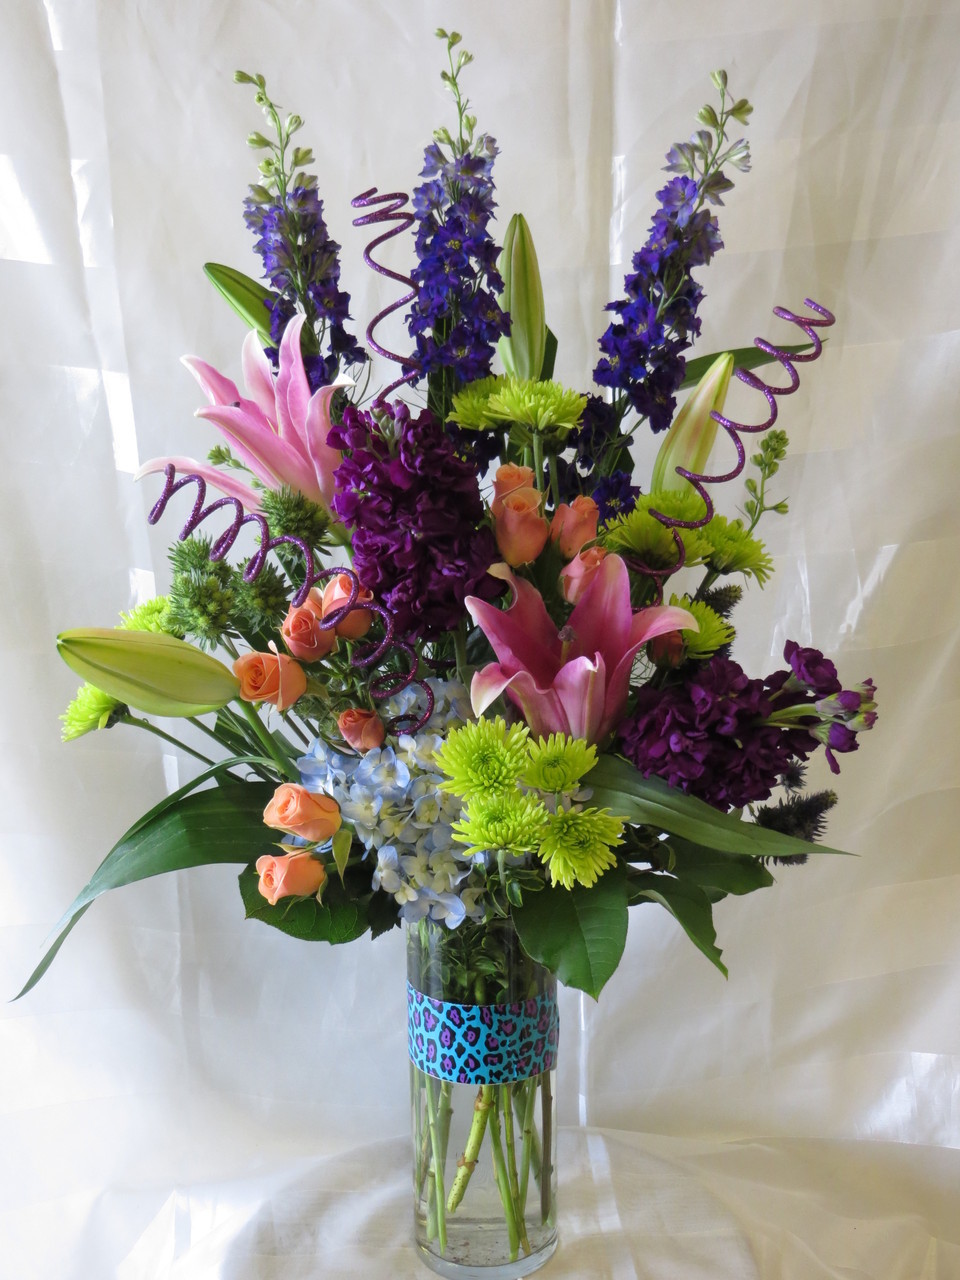 bosses day card messages ideas for delivery in houston texas flower delivery